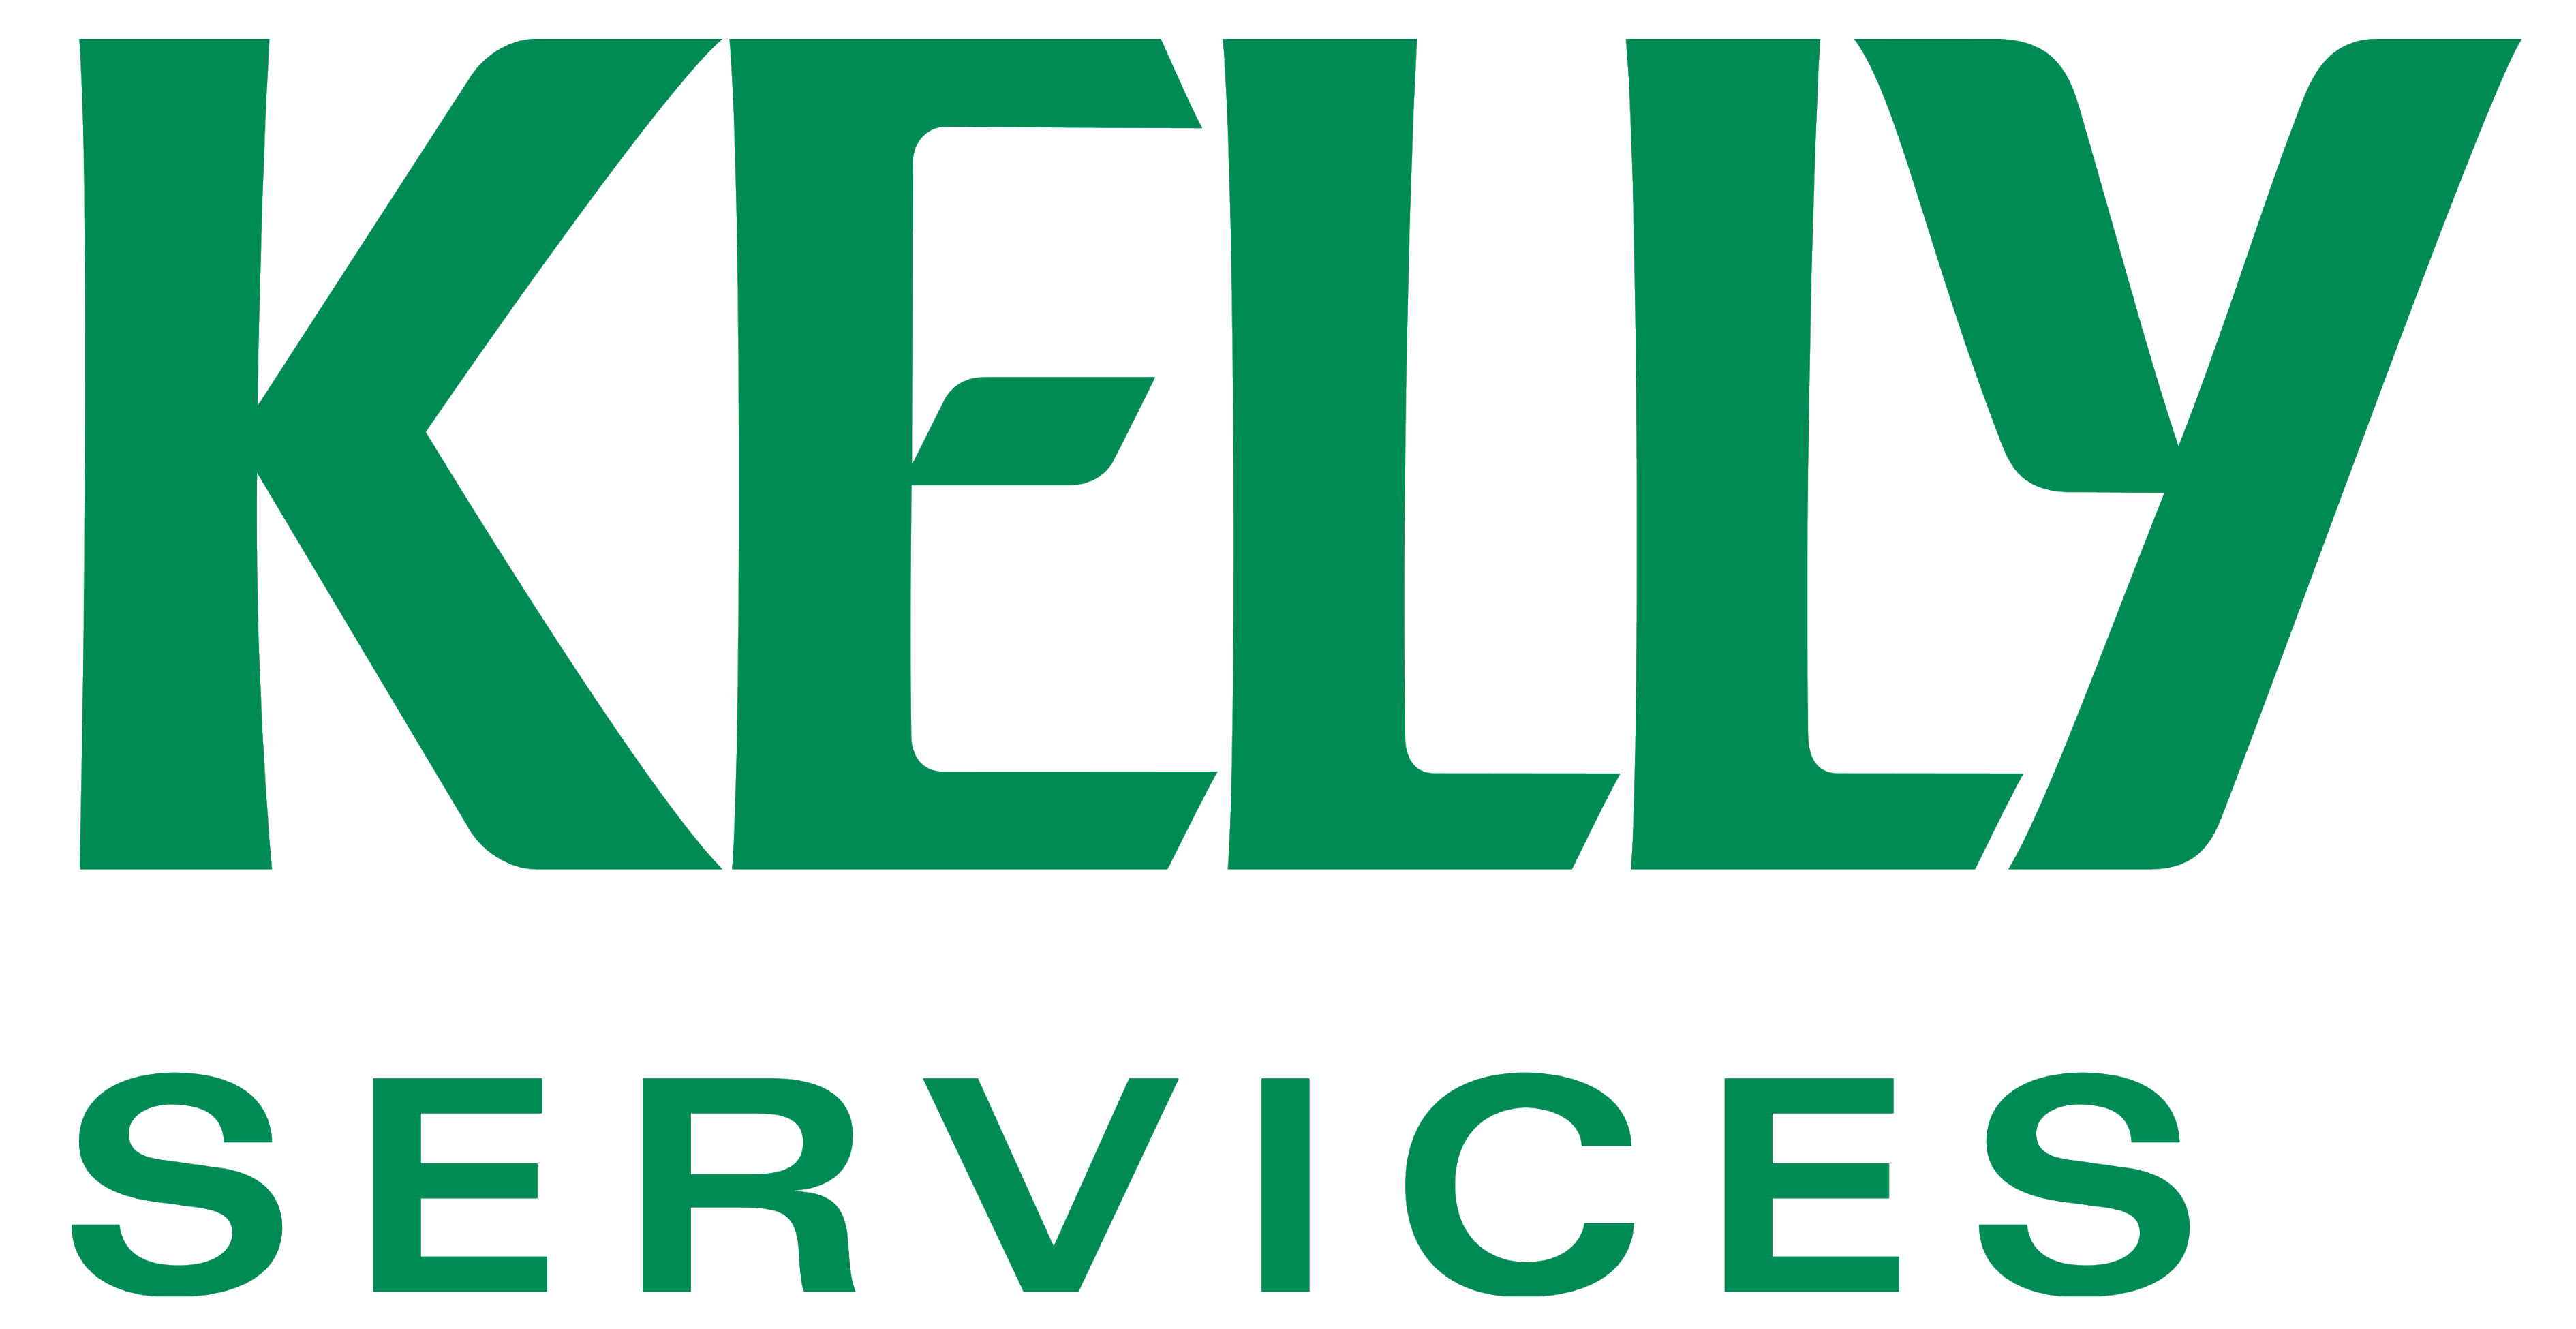 kelly-services-logos-download